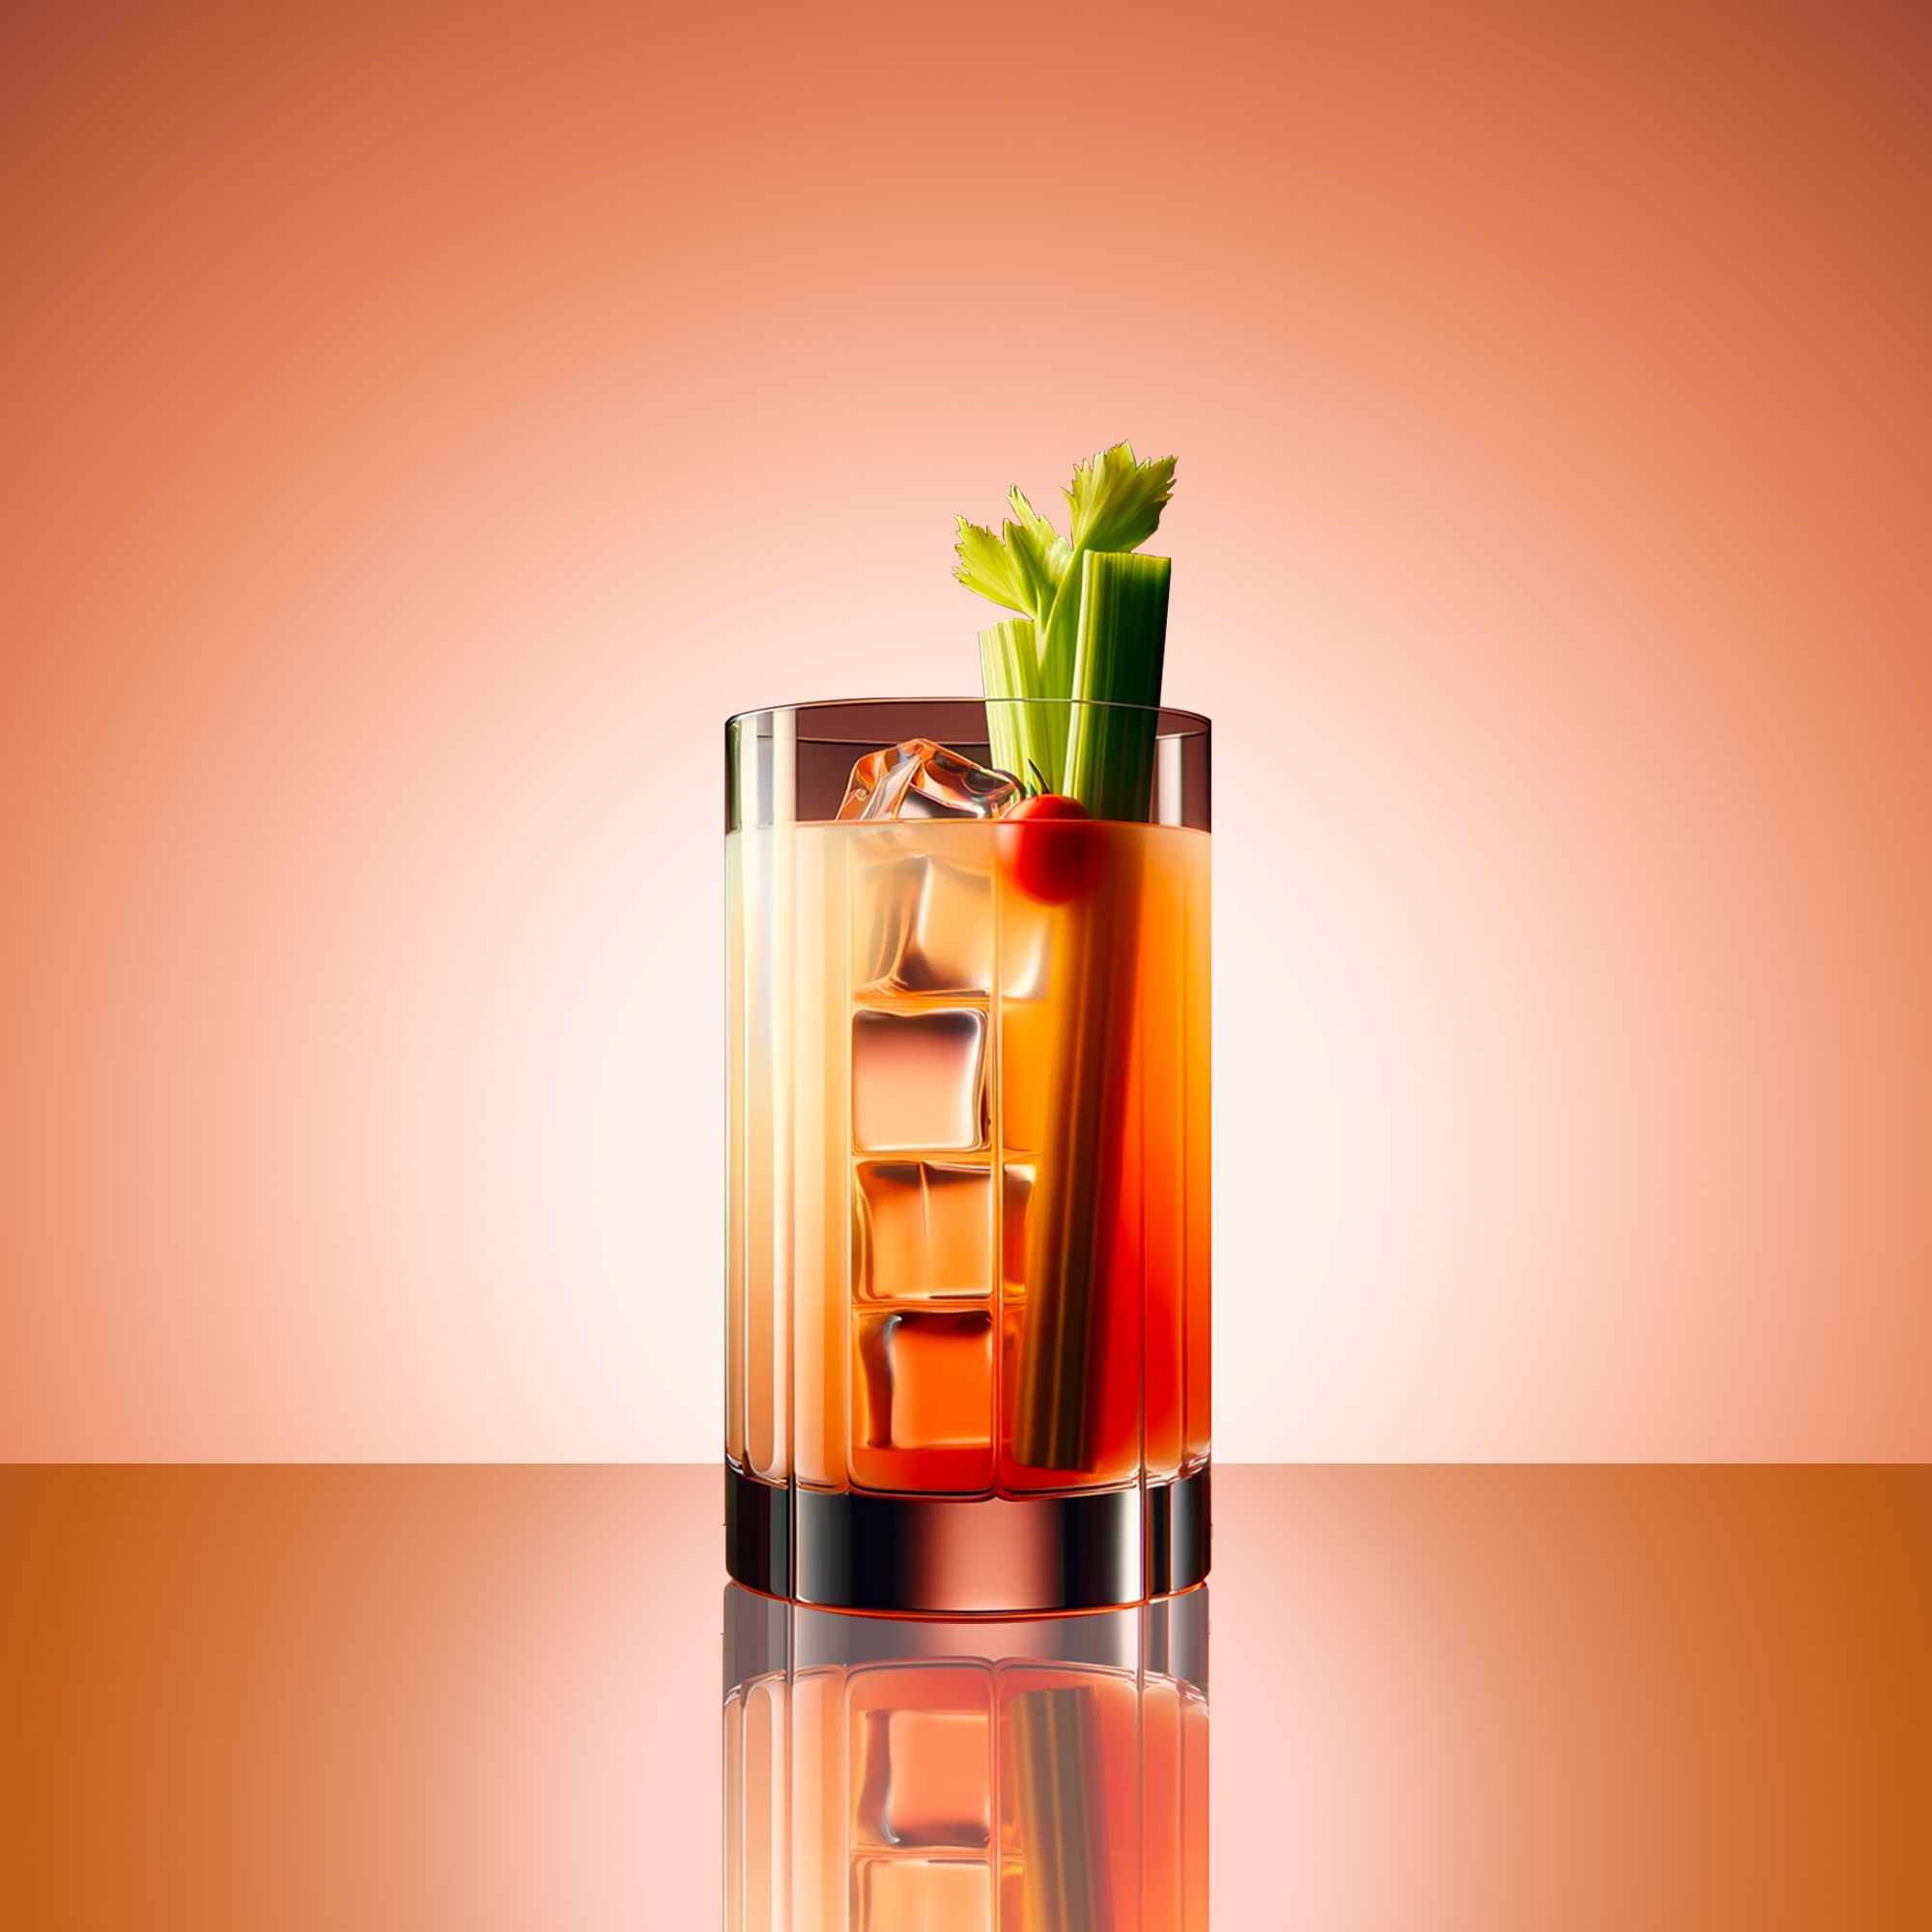 Bloody Mary in a tall glass with celery stick and cherry tomato. Crimson background and surface